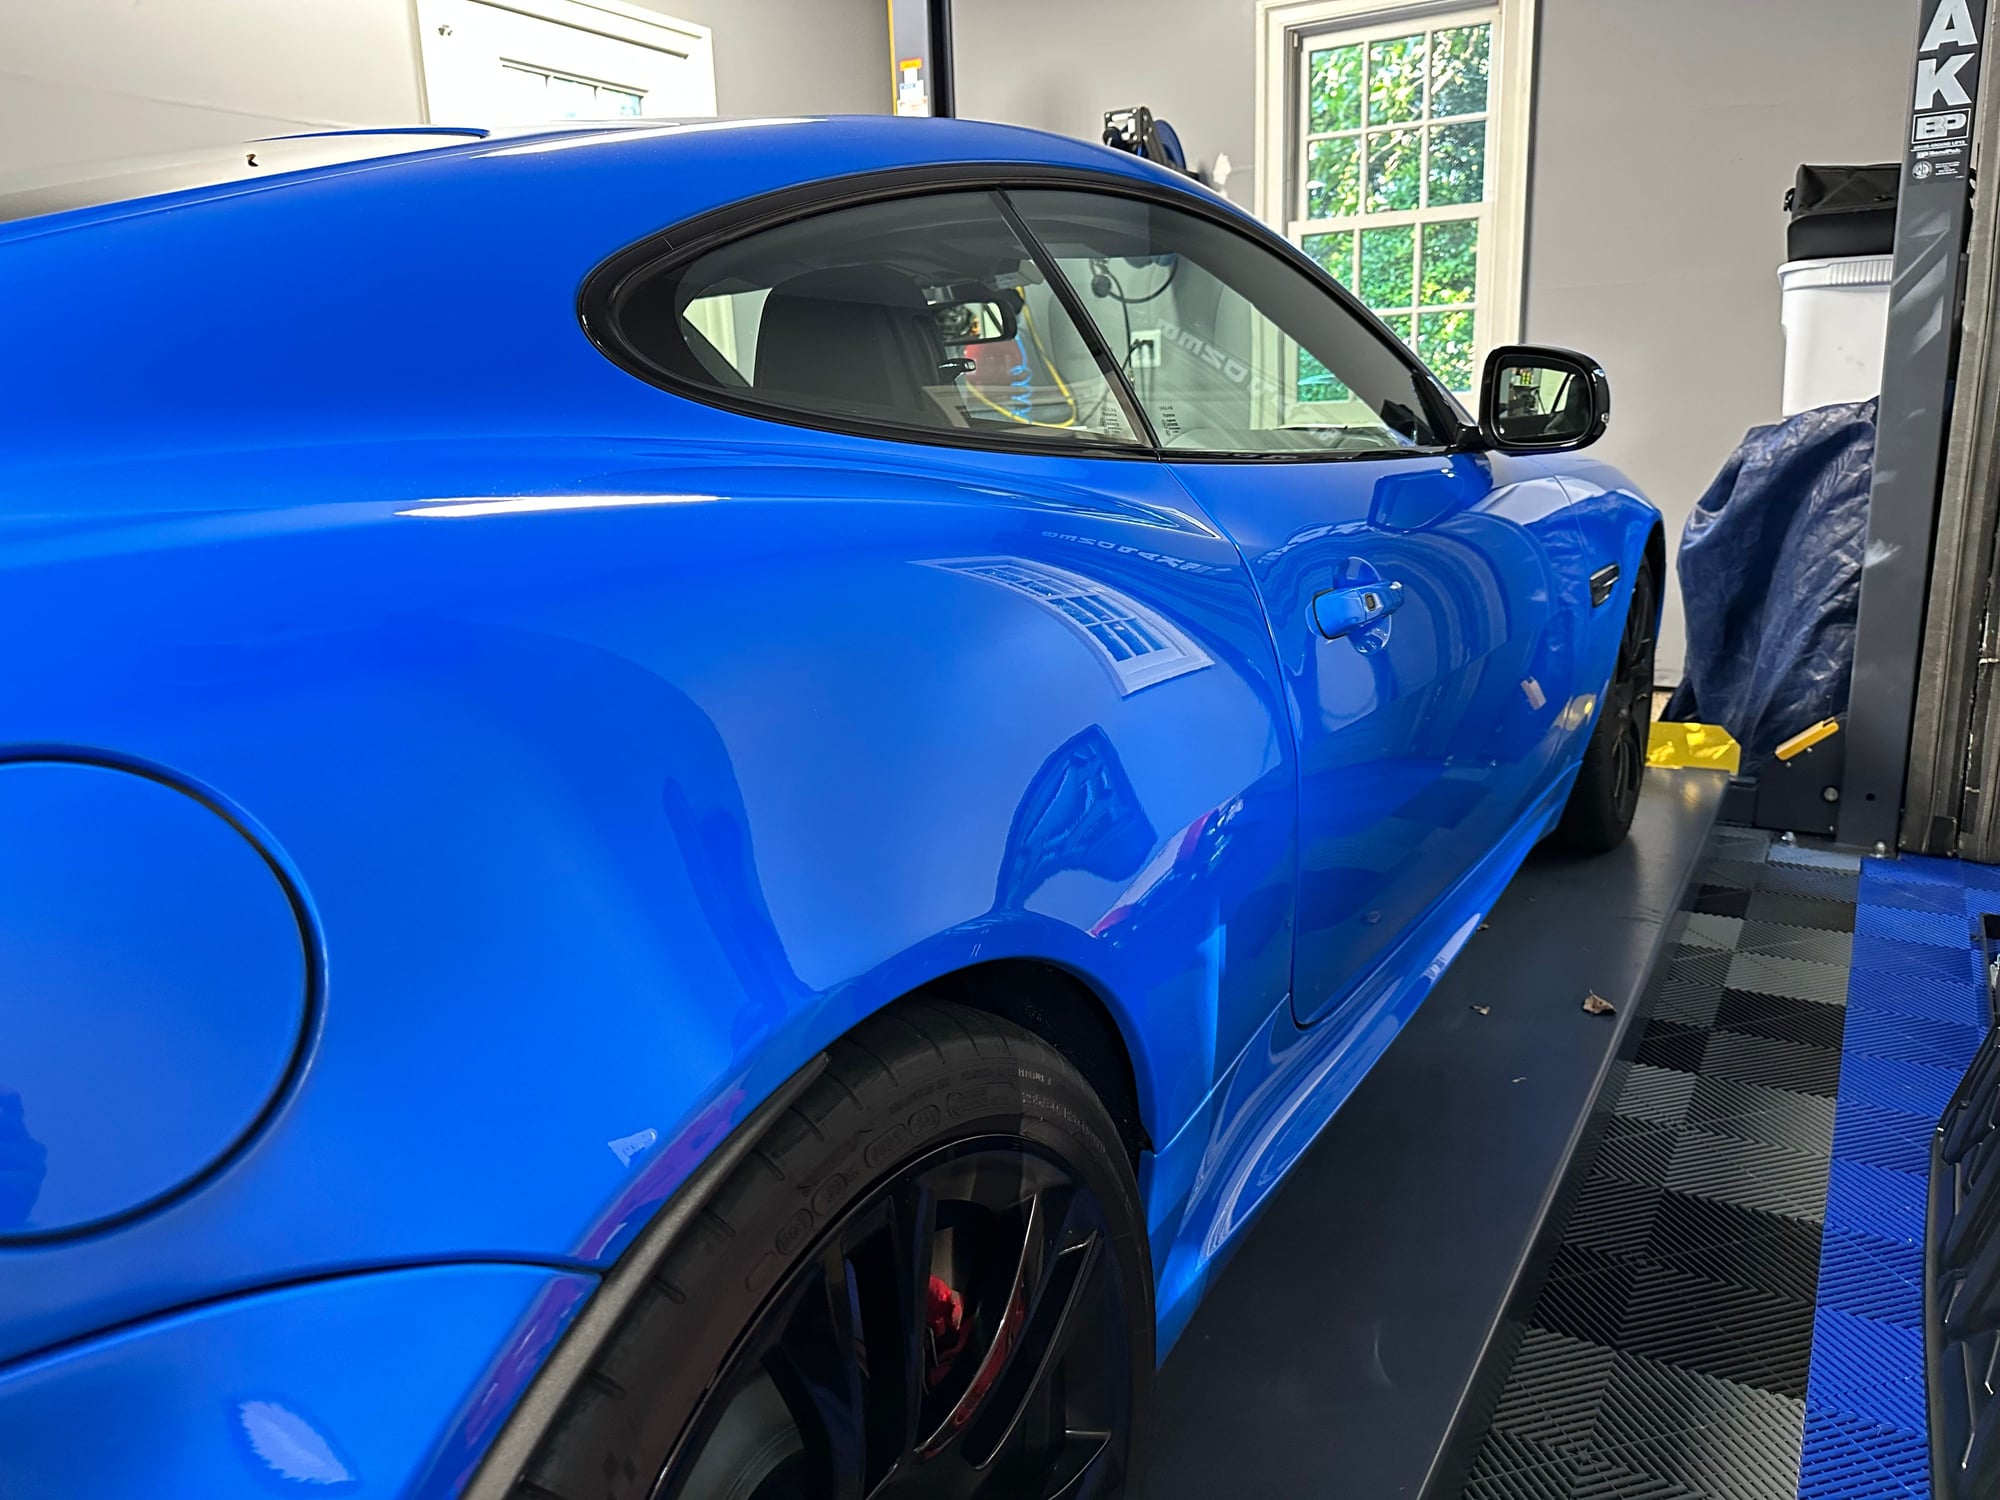 2012 Jaguar XKR-S - FRB XKR-S Coupe, 18K Miles - Used - VIN SAJWA4HA4CMB47130 - 18,000 Miles - 8 cyl - 2WD - Automatic - Coupe - Blue - Potomac, MD 20854, United States